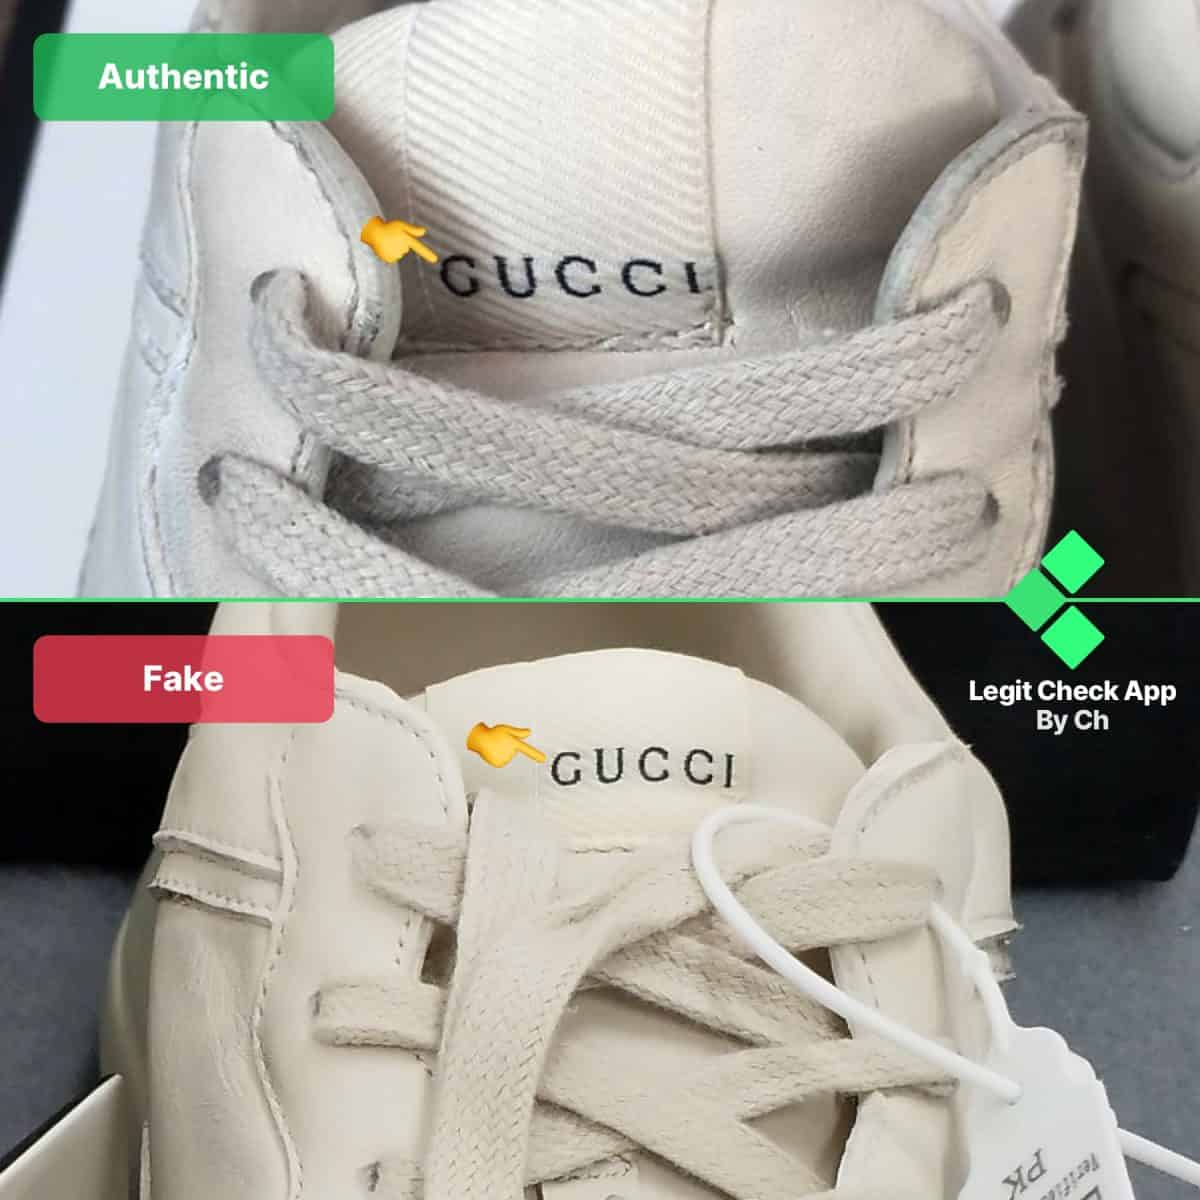 Fake Vs Real Gucci Rhyton - How To Spot 